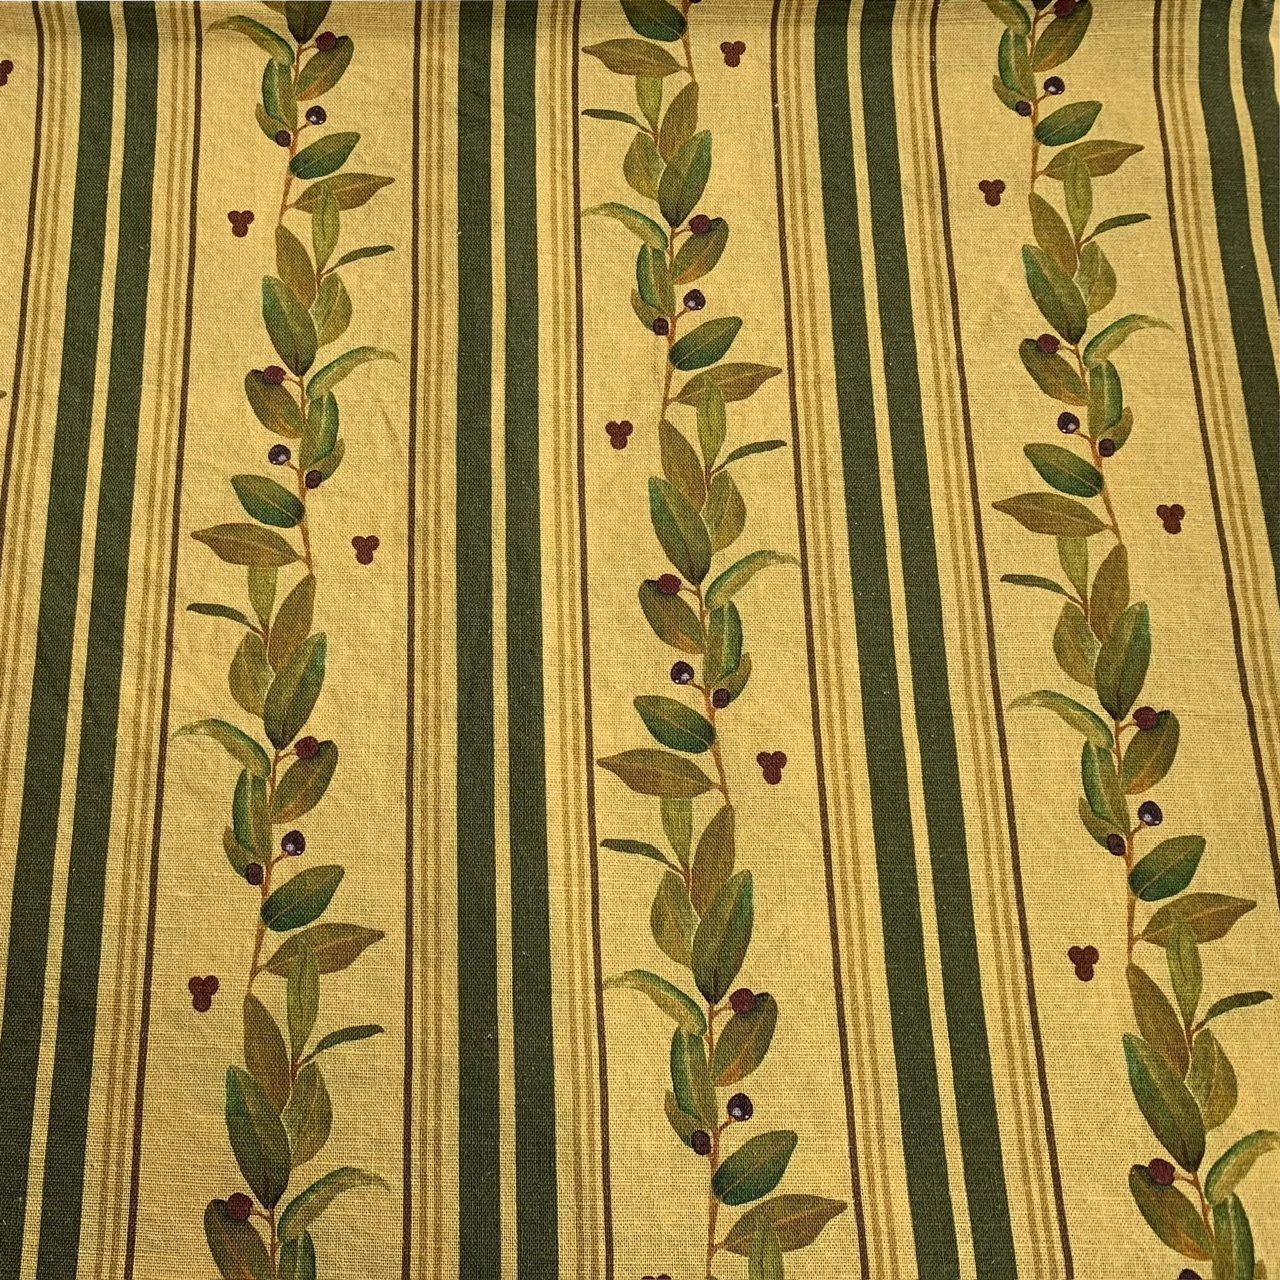 A repeat pattern printed onto a cotton-linen fabric with neutral colours, including a rich beige background, with striking deep green stripes, motifs of leafy green plant.